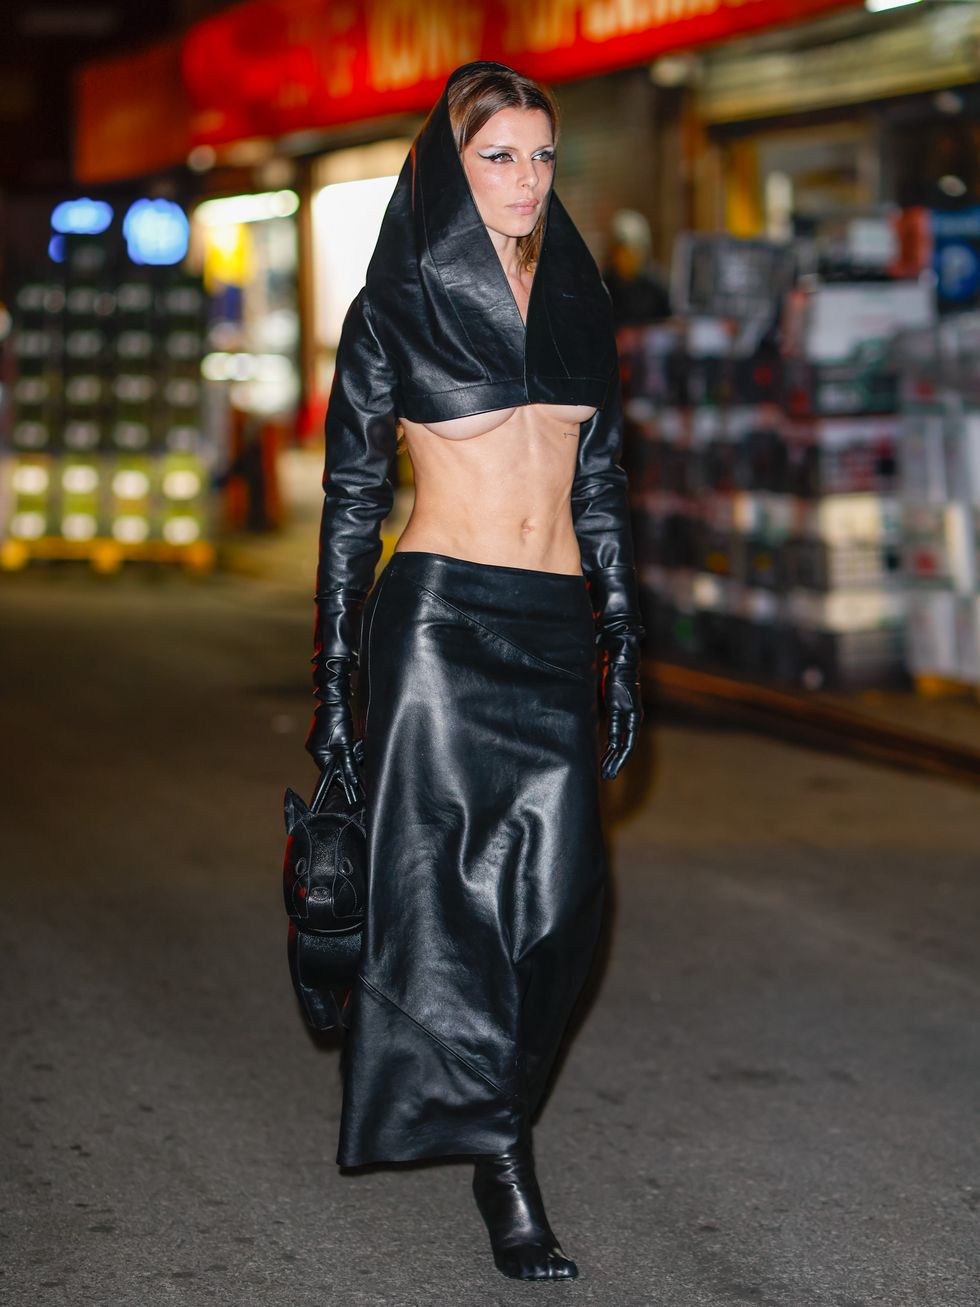 Freq G Hooded Crop Jacket - Leather  Leather jacket, Cropped leather jacket,  Celebrities leather jacket